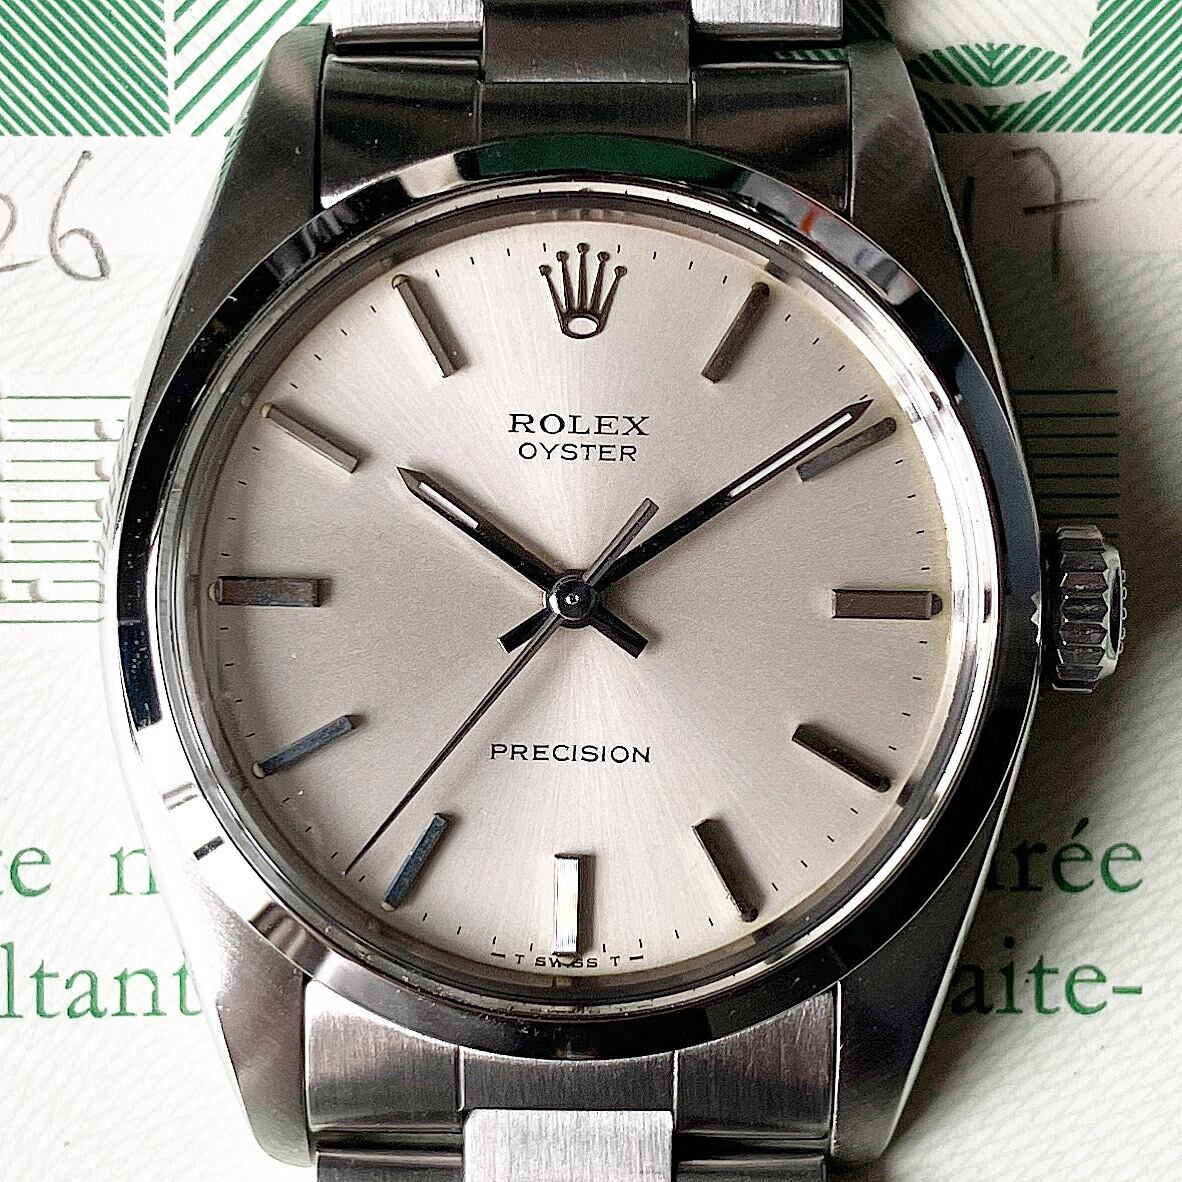 Rolex Oyster 6426 (41*****) Silver with Paper | Nivram ヴィンテージ時計ショップ